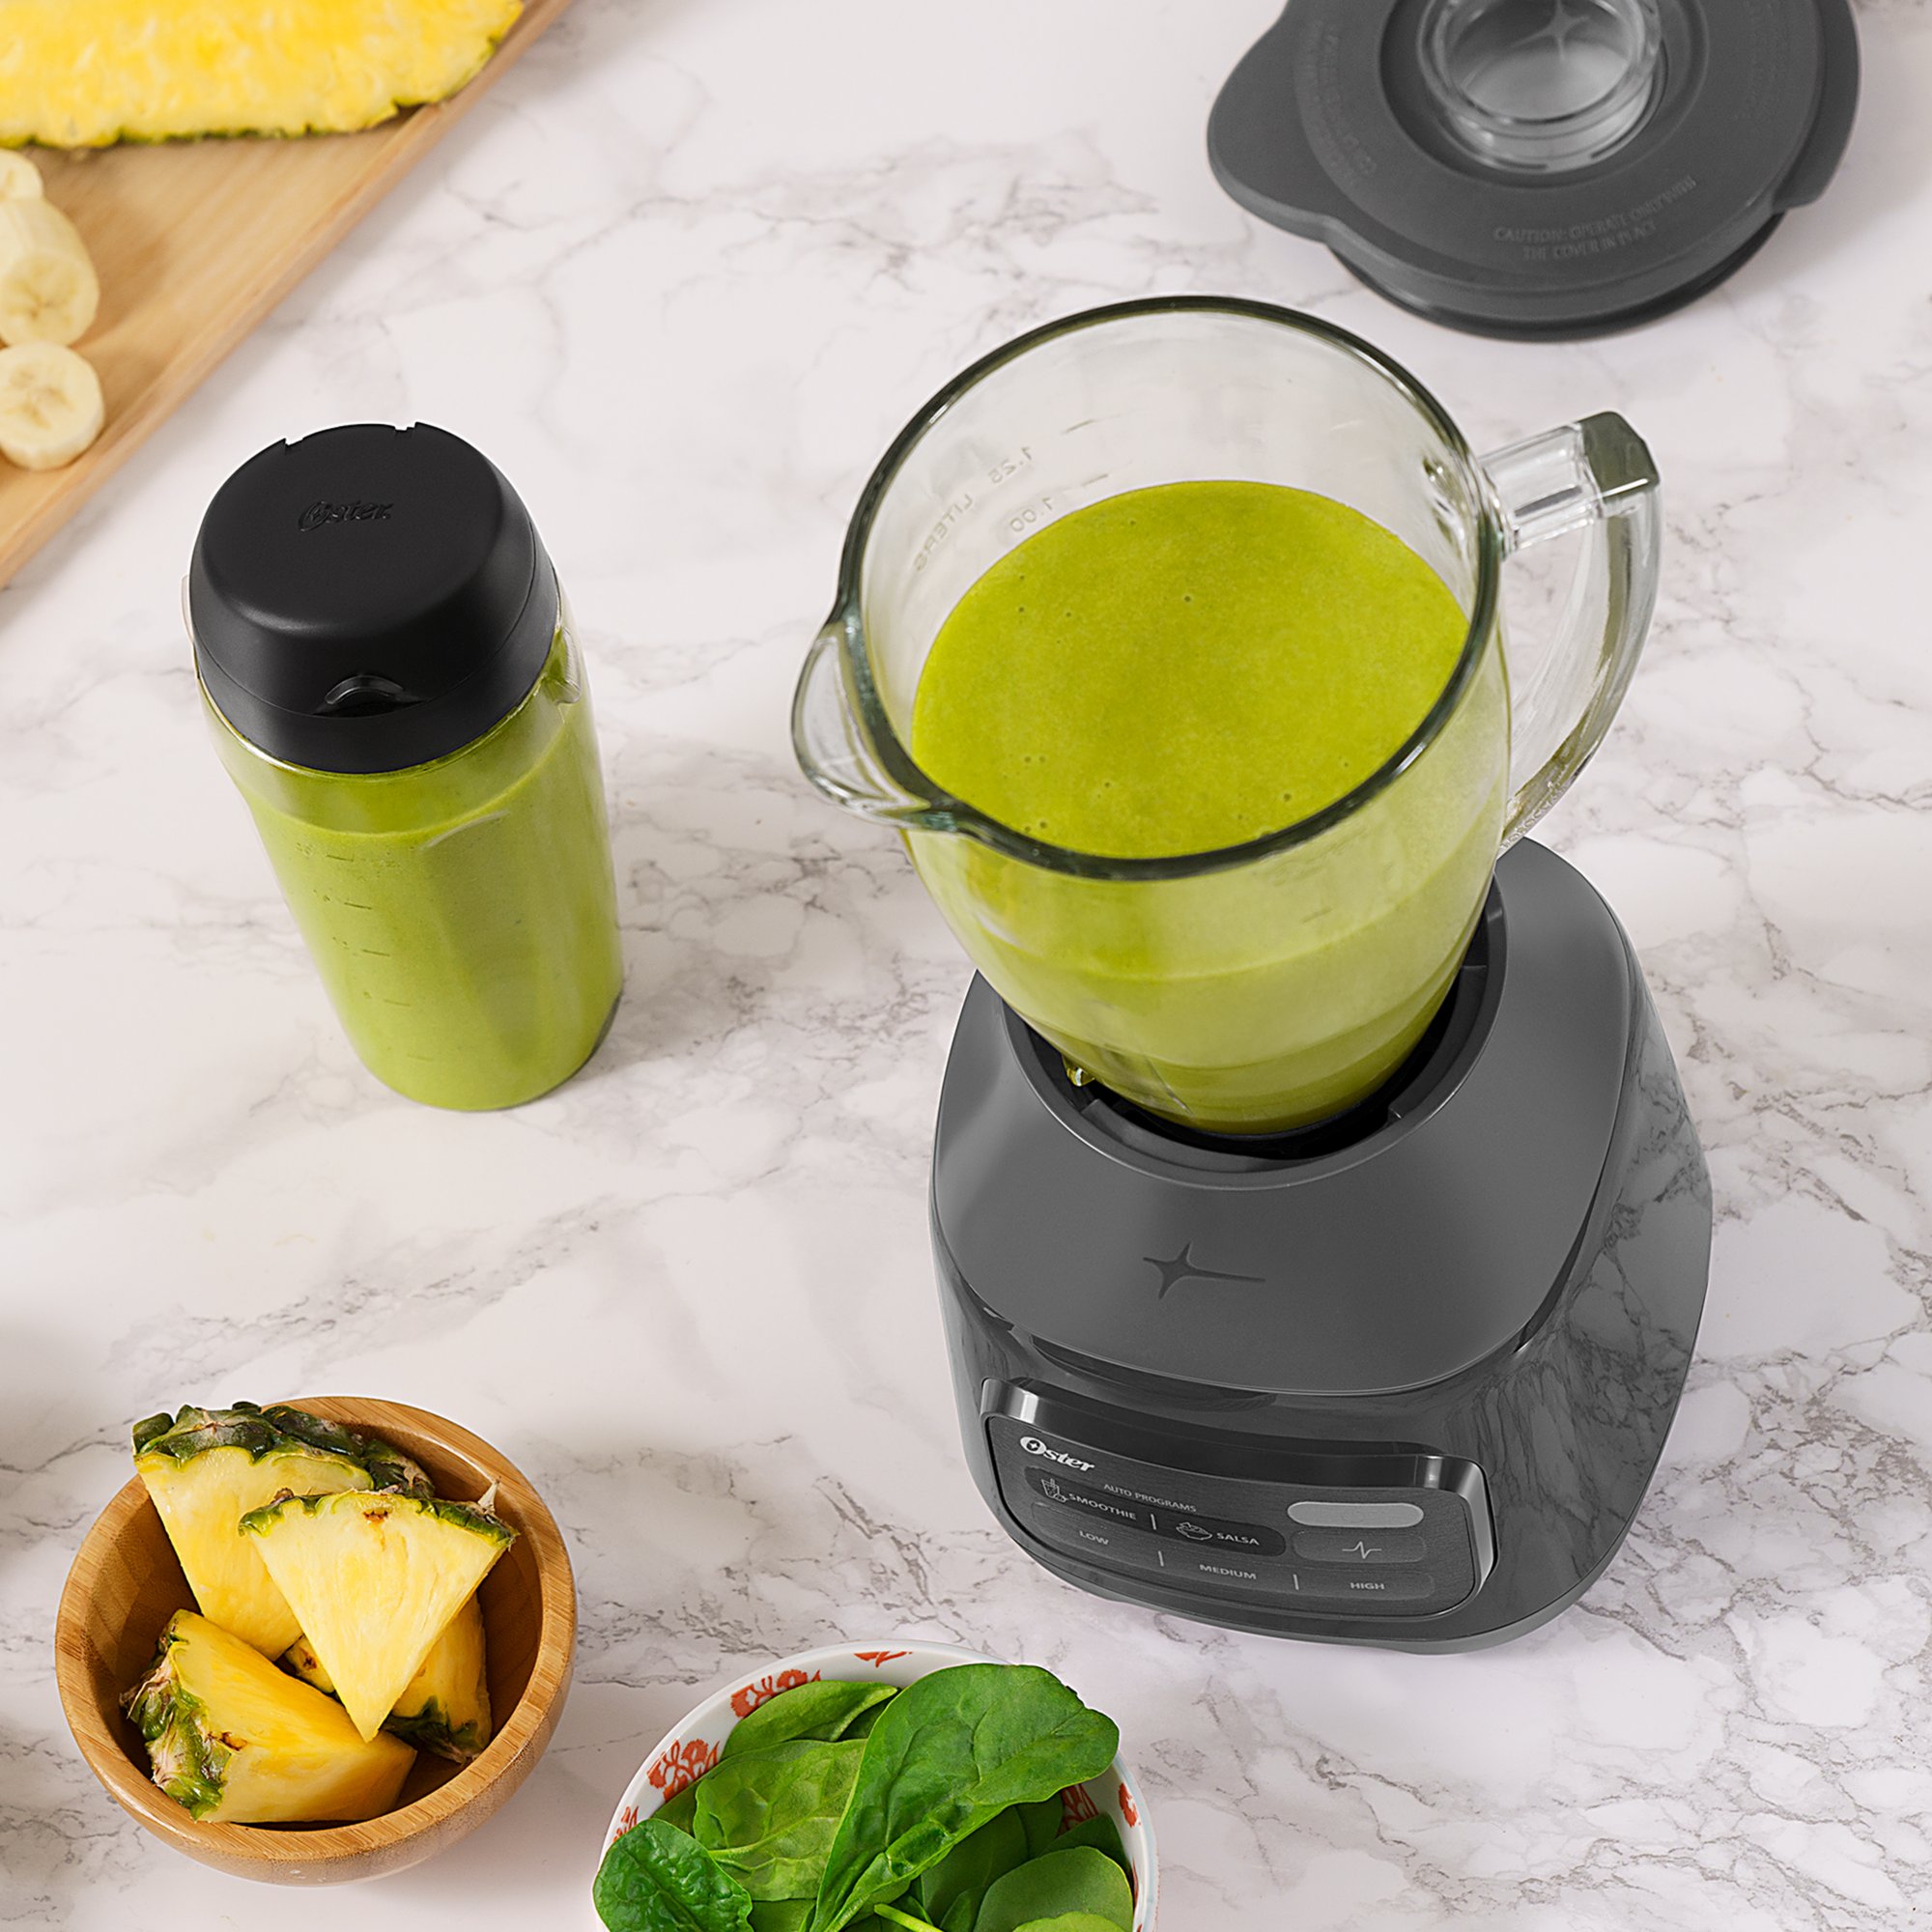 https://s7d9.scene7.com/is/image/NewellRubbermaid/DC_31969_Oster-2021_Innovation_OneTouchBlender_2in1_System_Mr-Peanutbutter-ID-E_Production_EnhancedATF_2142919_ATF_6?wid=2000&hei=2000